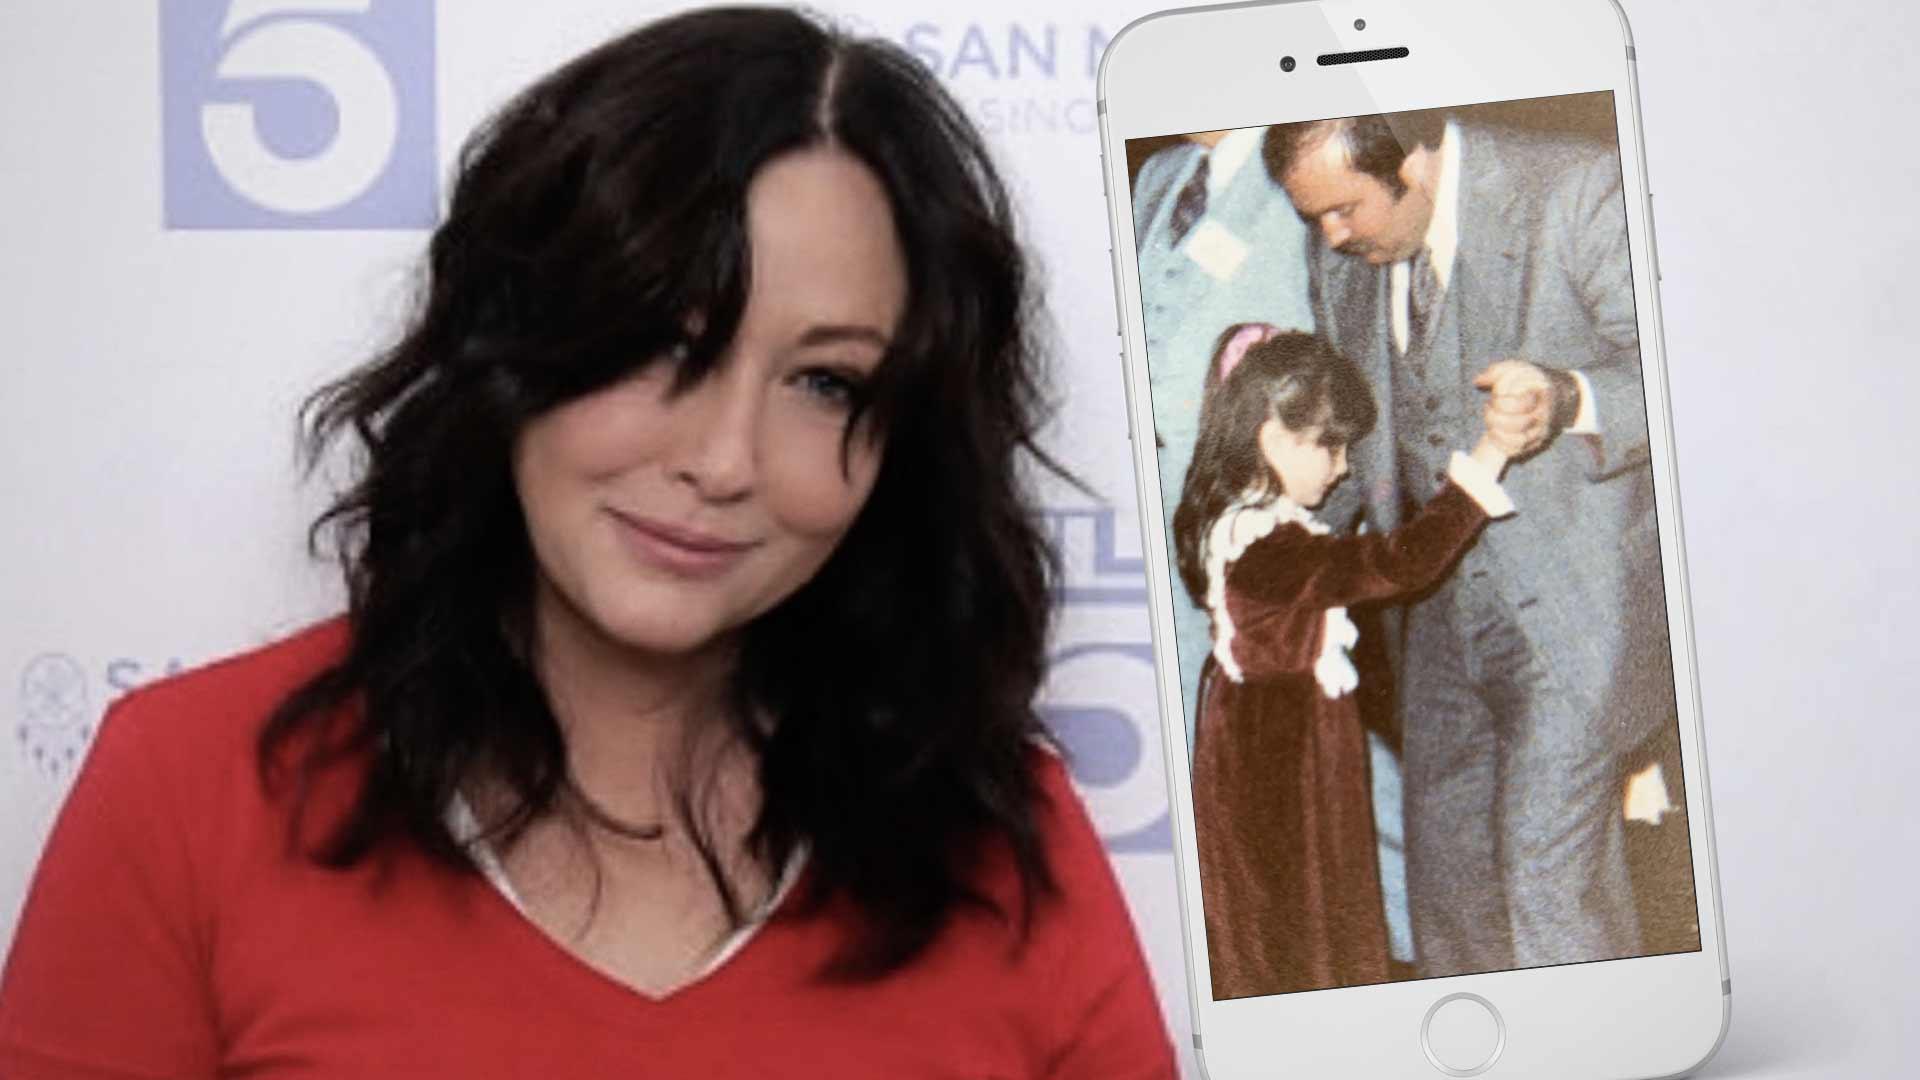 Shannen Doherty Pens Tearful Tribute To Late Father After Best Friend’s Death